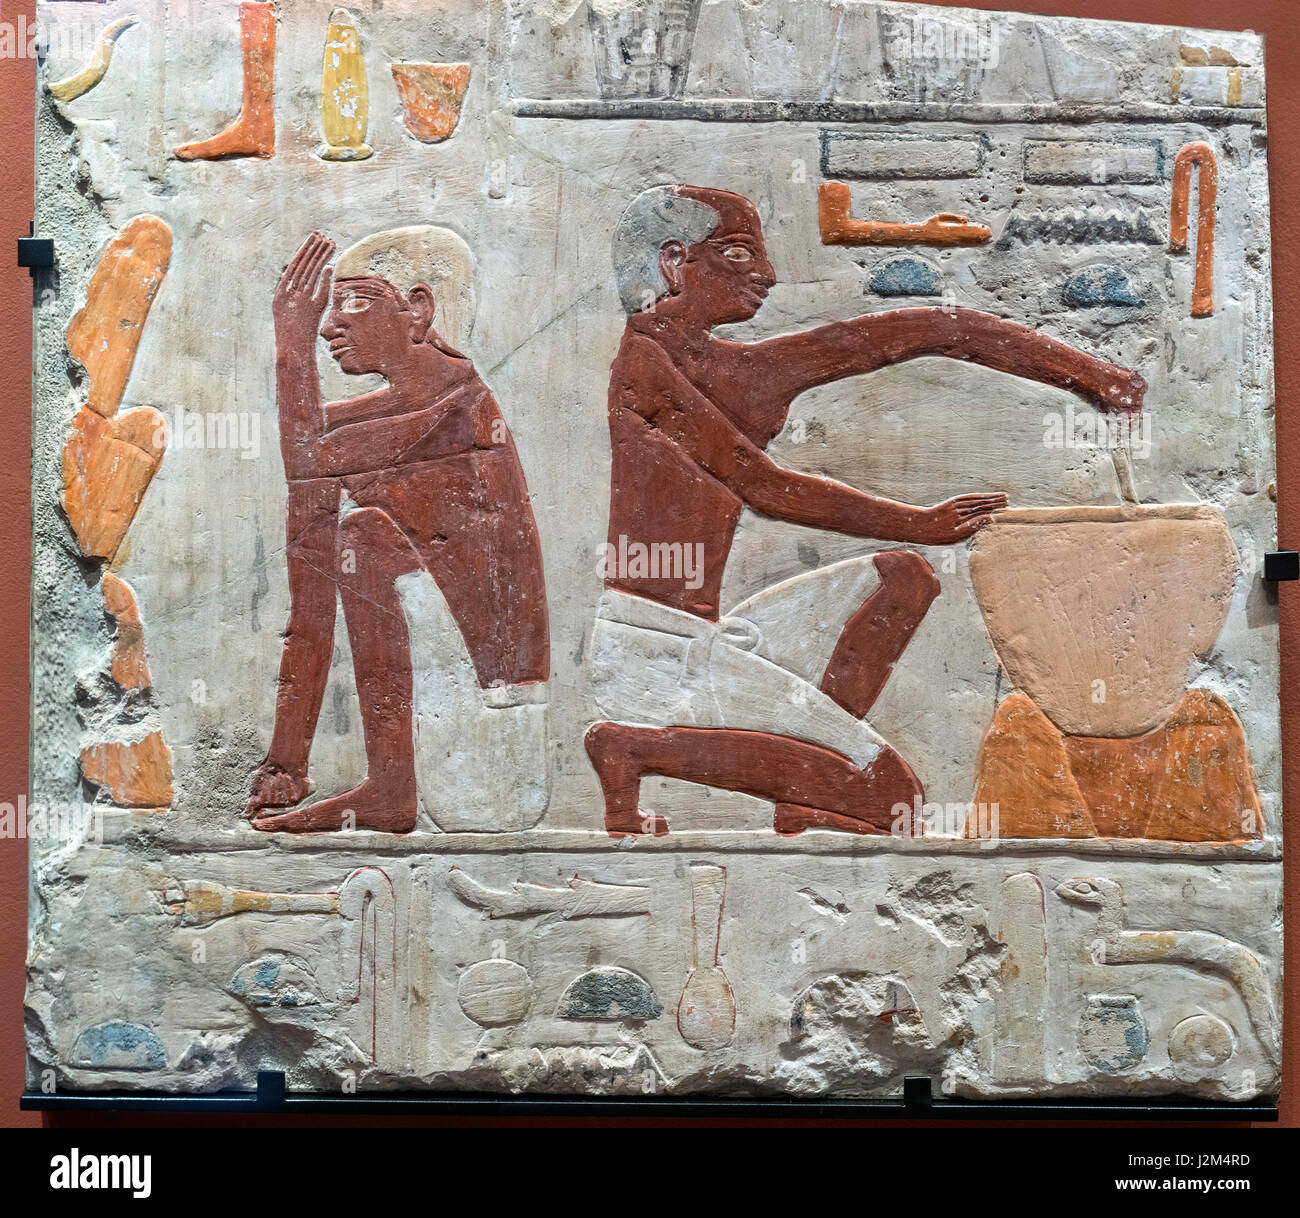 Egyptian wall painting showing the making and baking of bread, c. 2500-2300 BC. Stock Photo